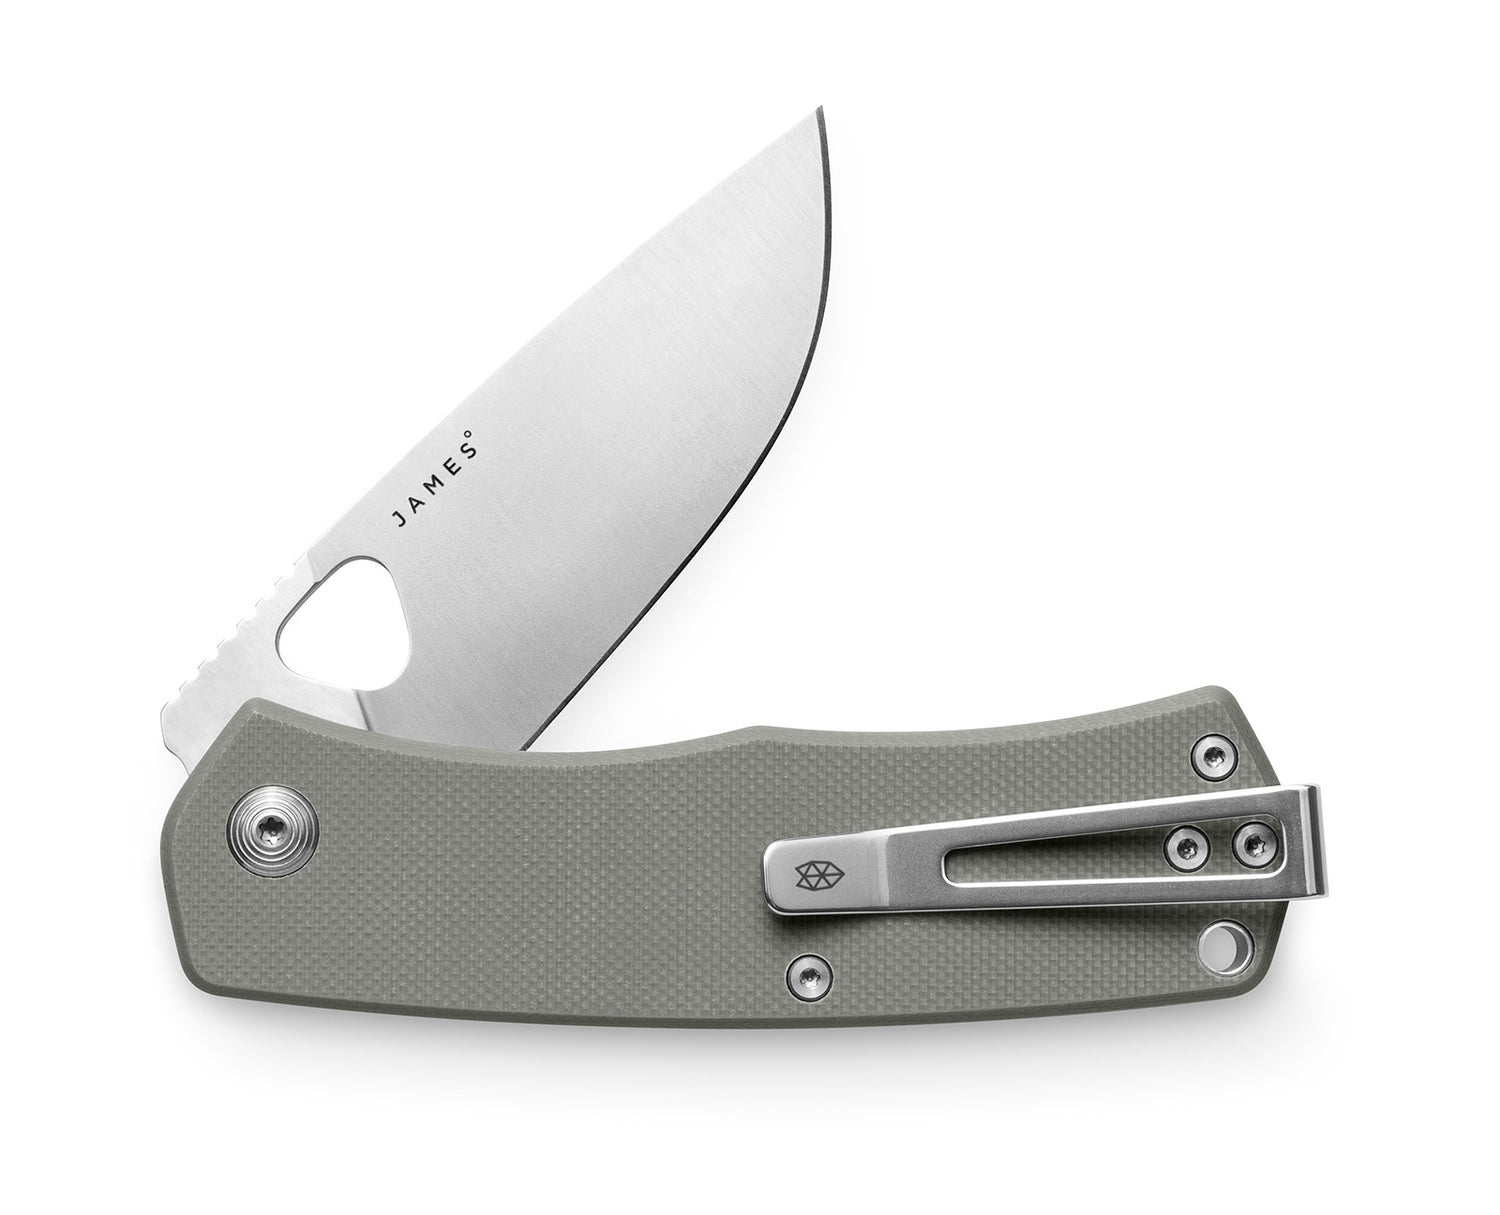 The Folsom blade with primer gray handle and stainless steel blade.